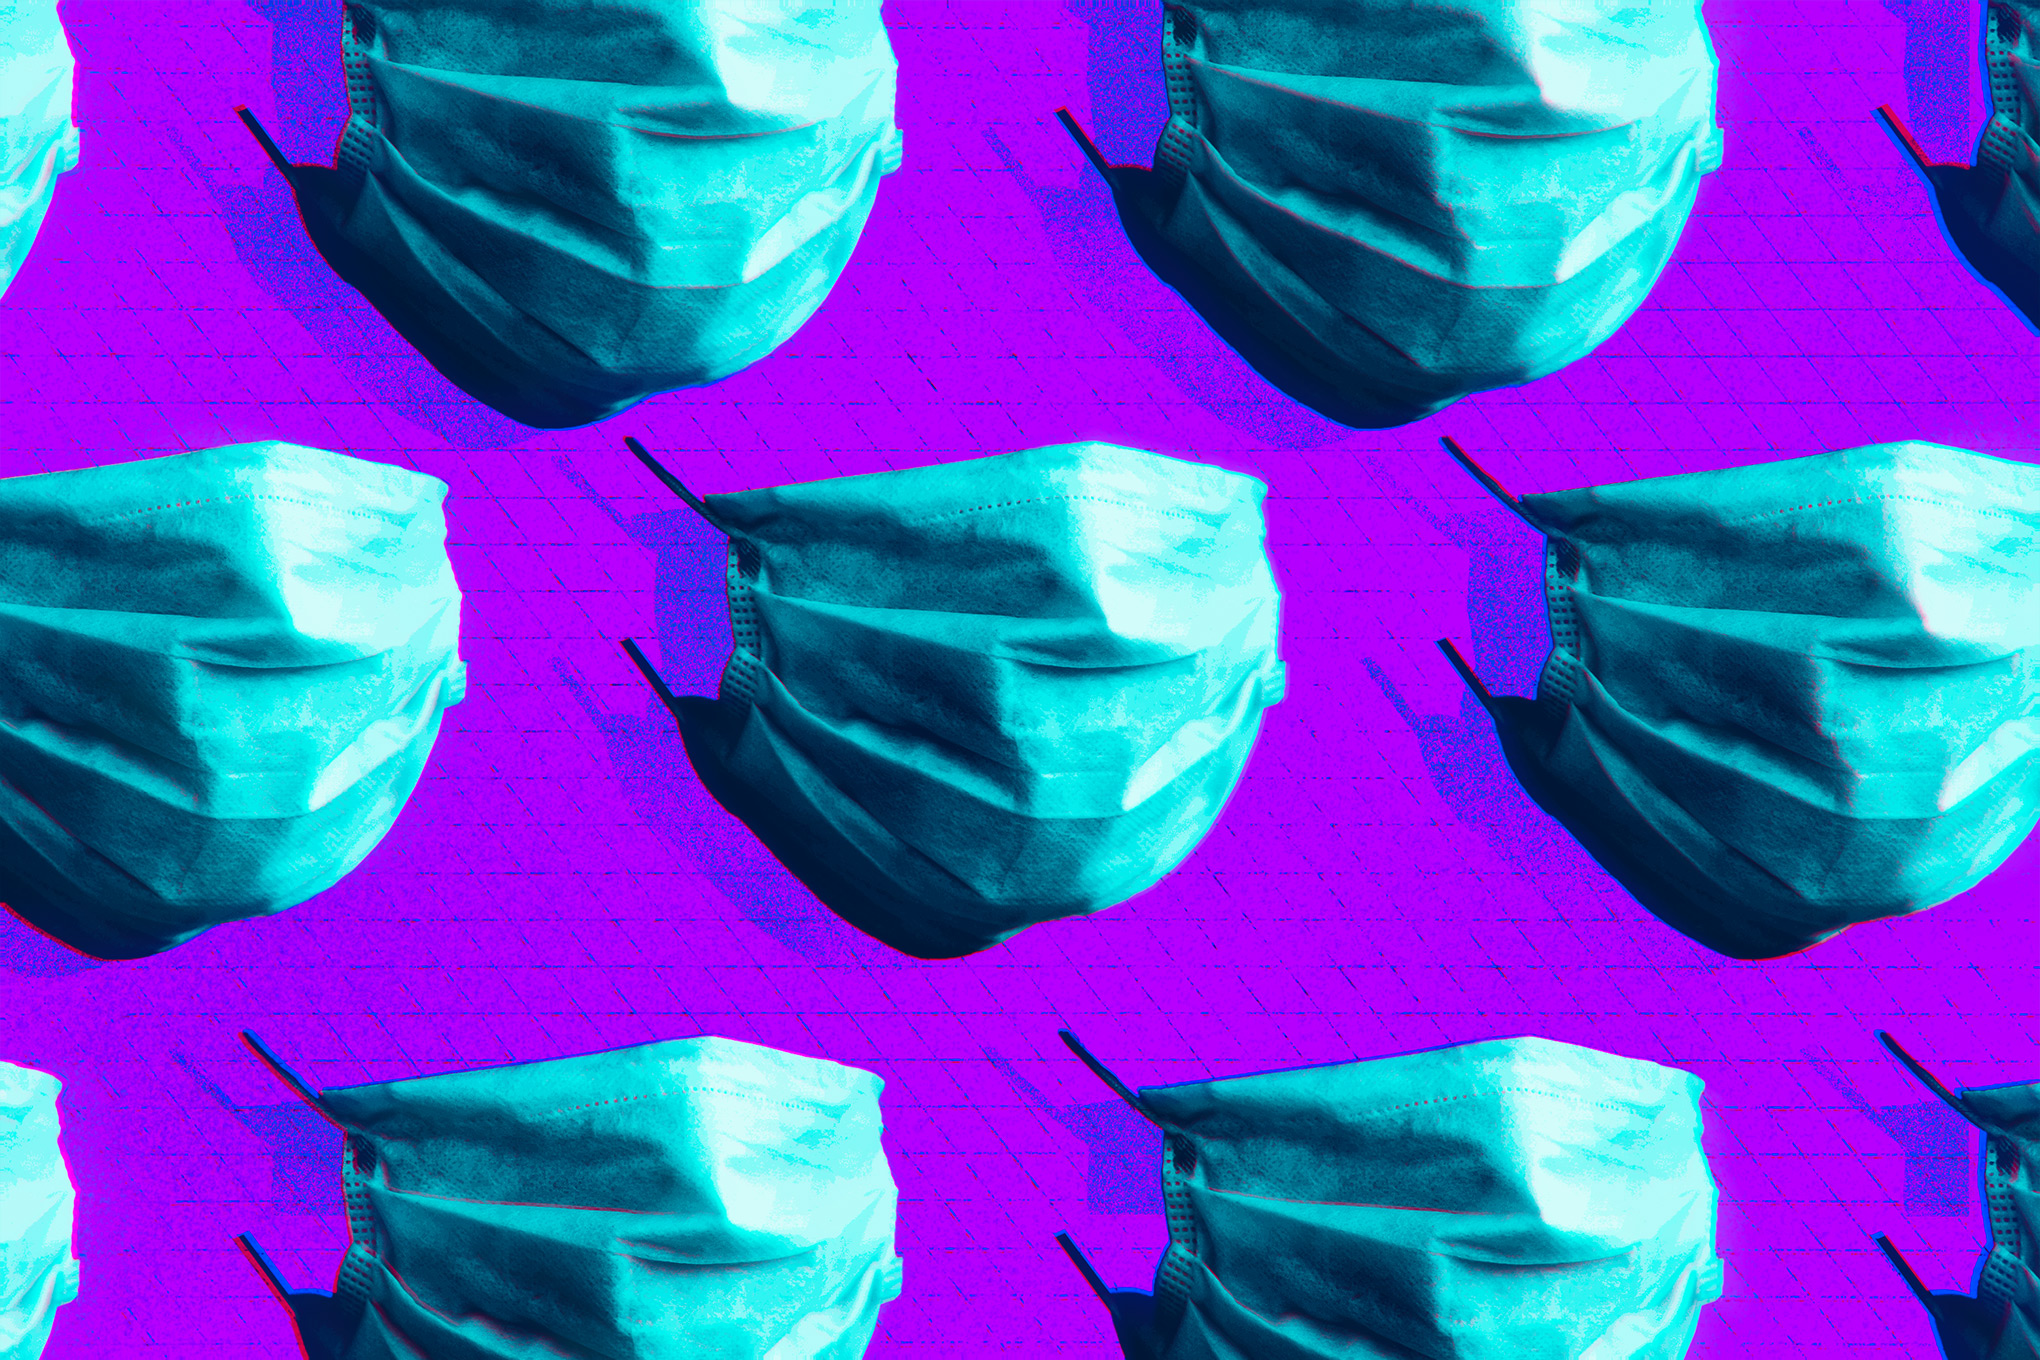 A pattern of light blue face masks against a purple background.